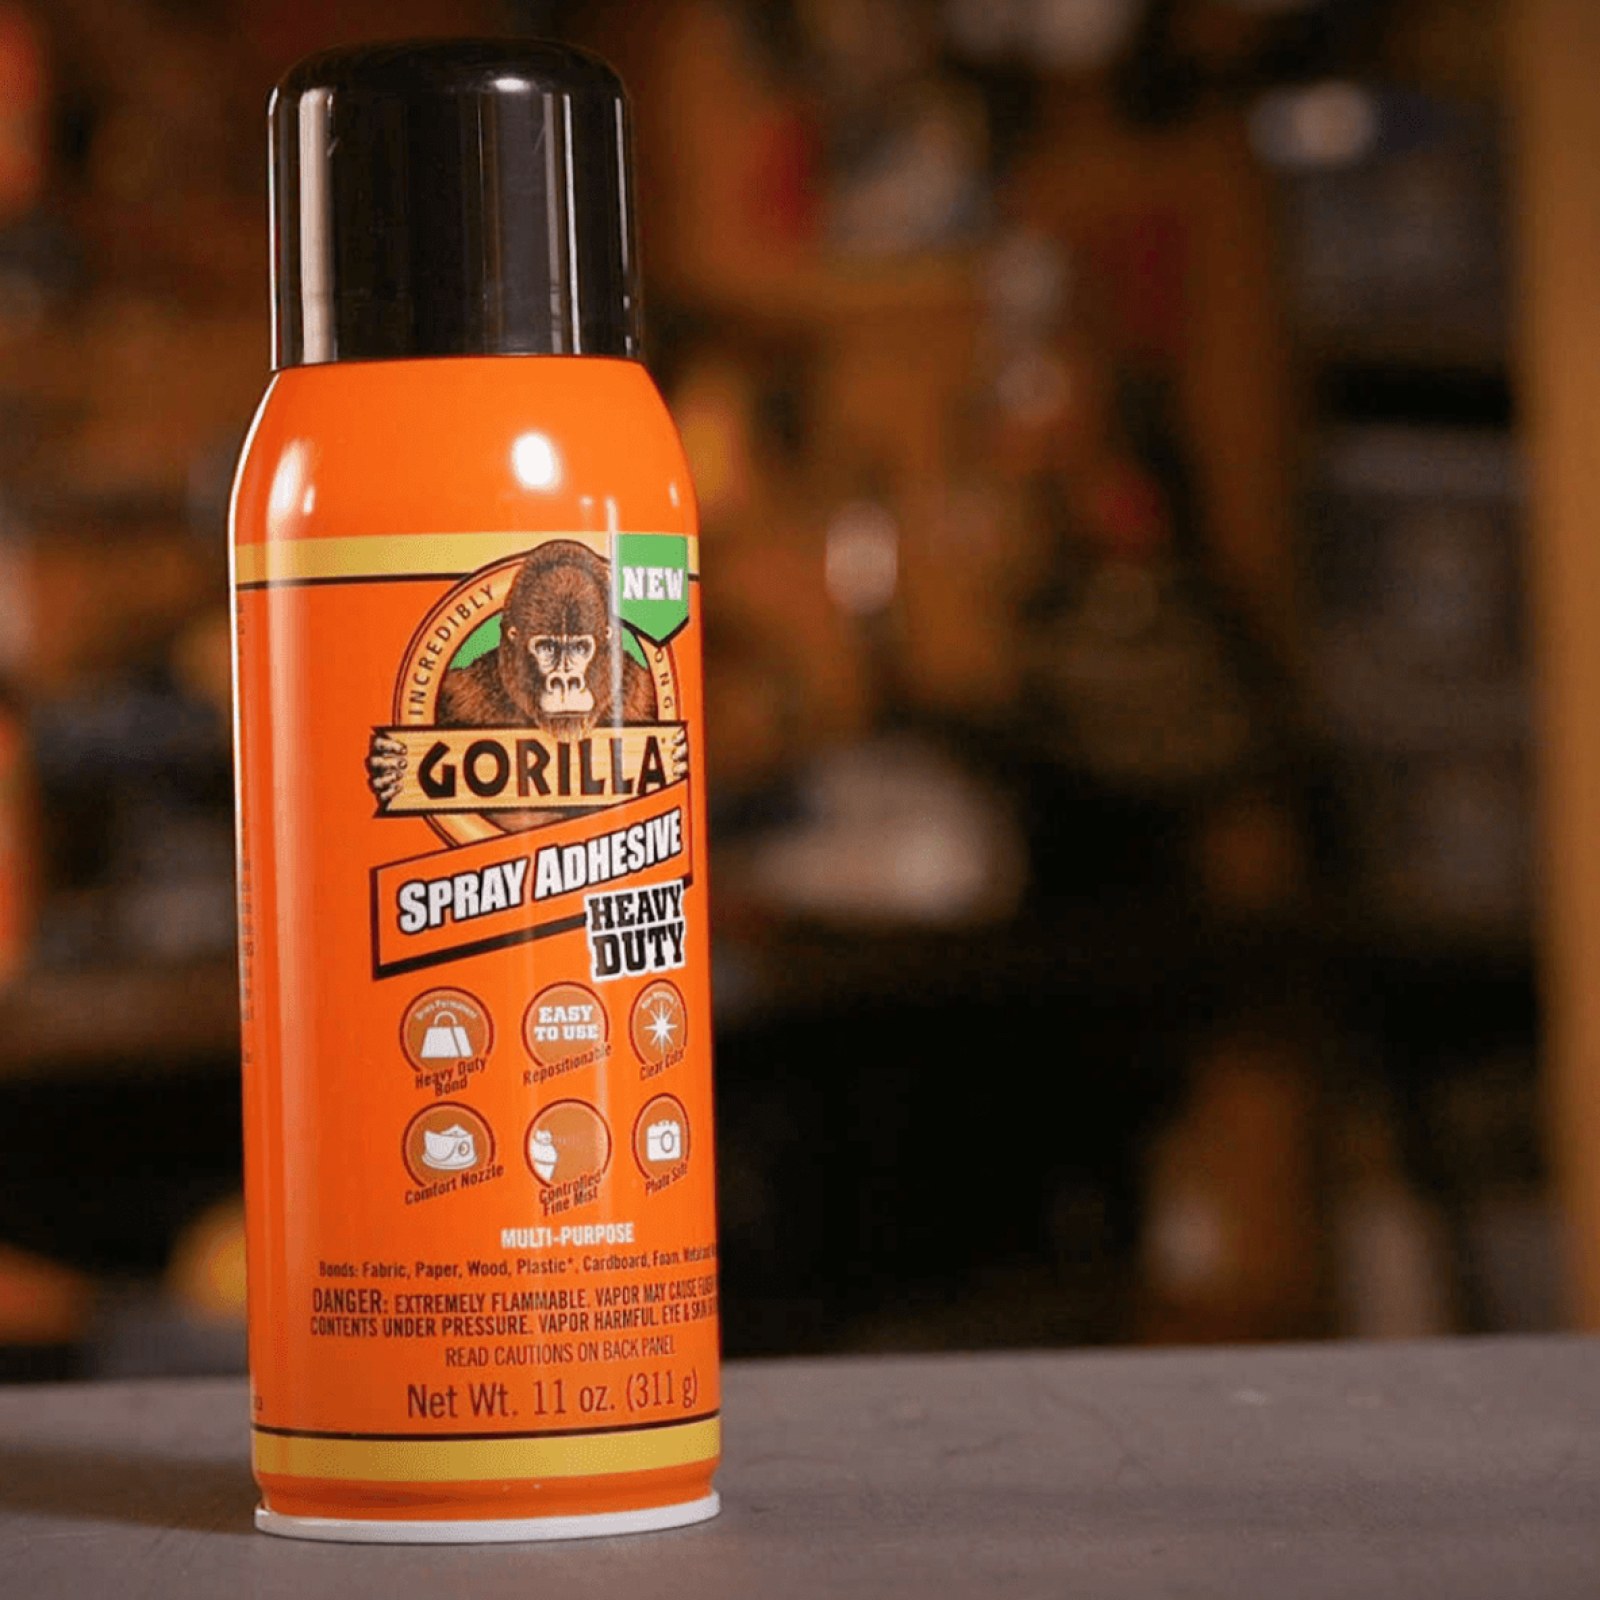 Woman who styled hair with Gorilla Glue reportedly considering